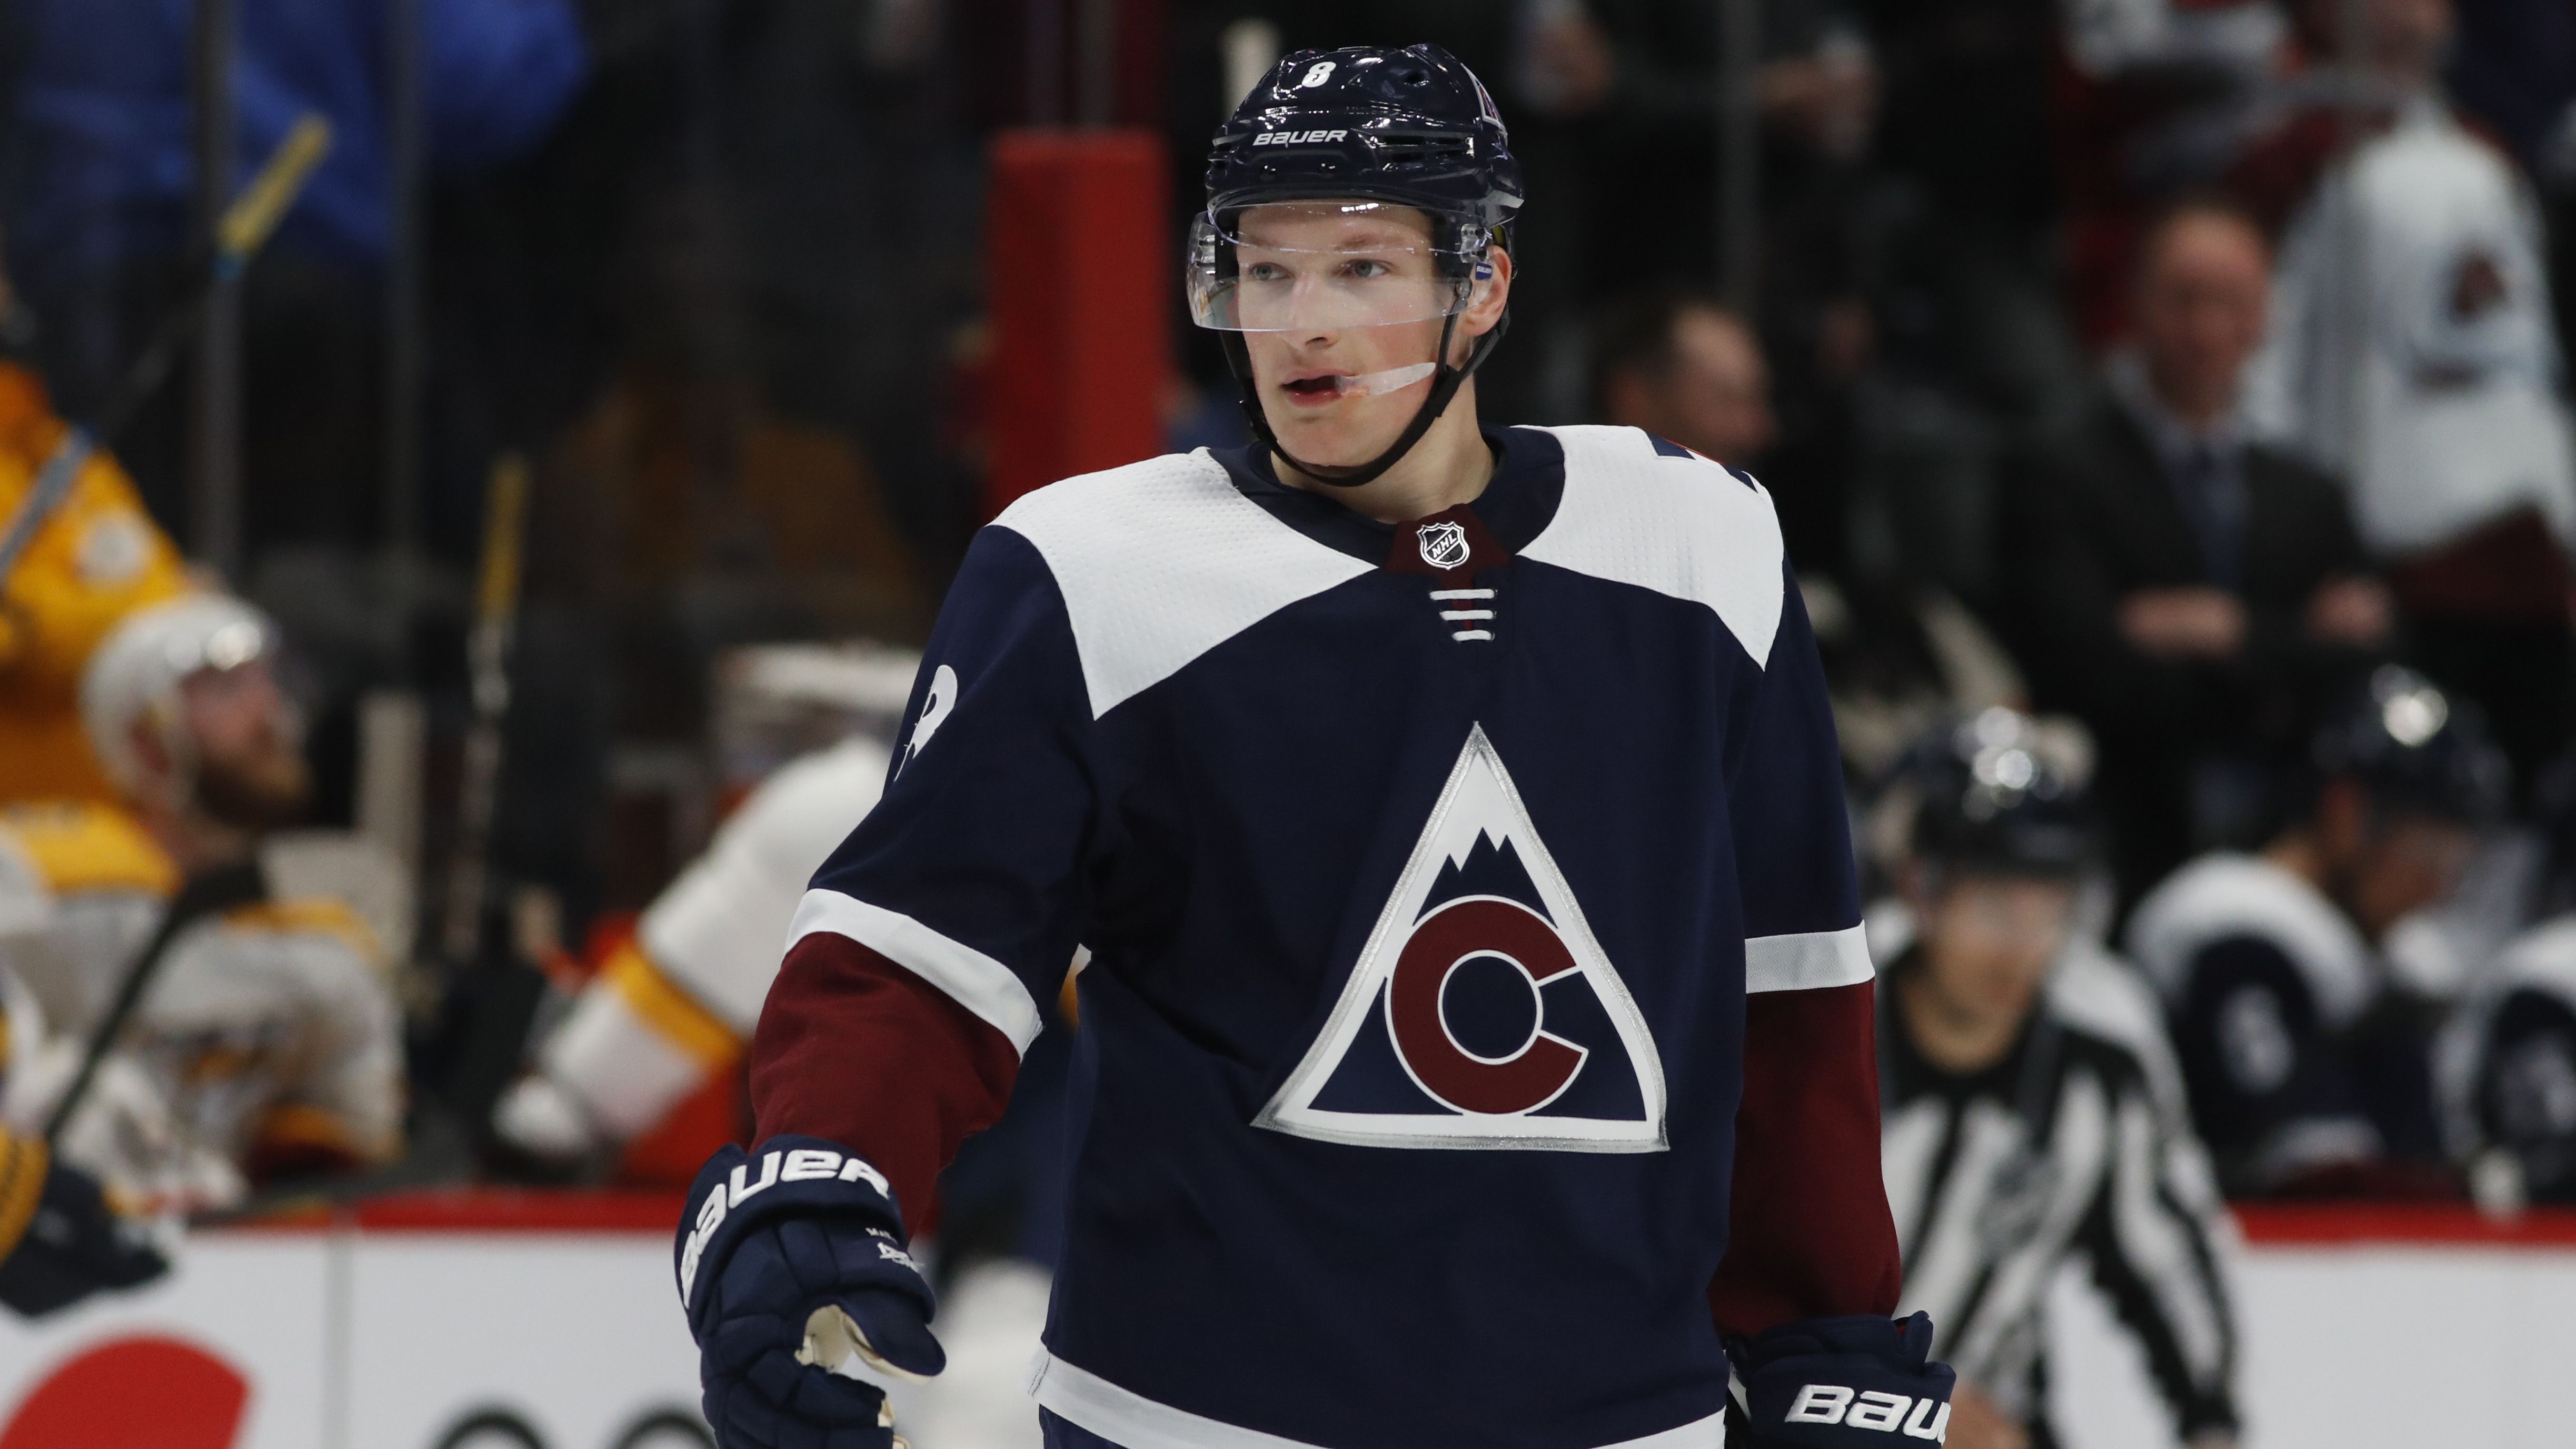 Cale Makar won't suit up for the Avalanche when they face the